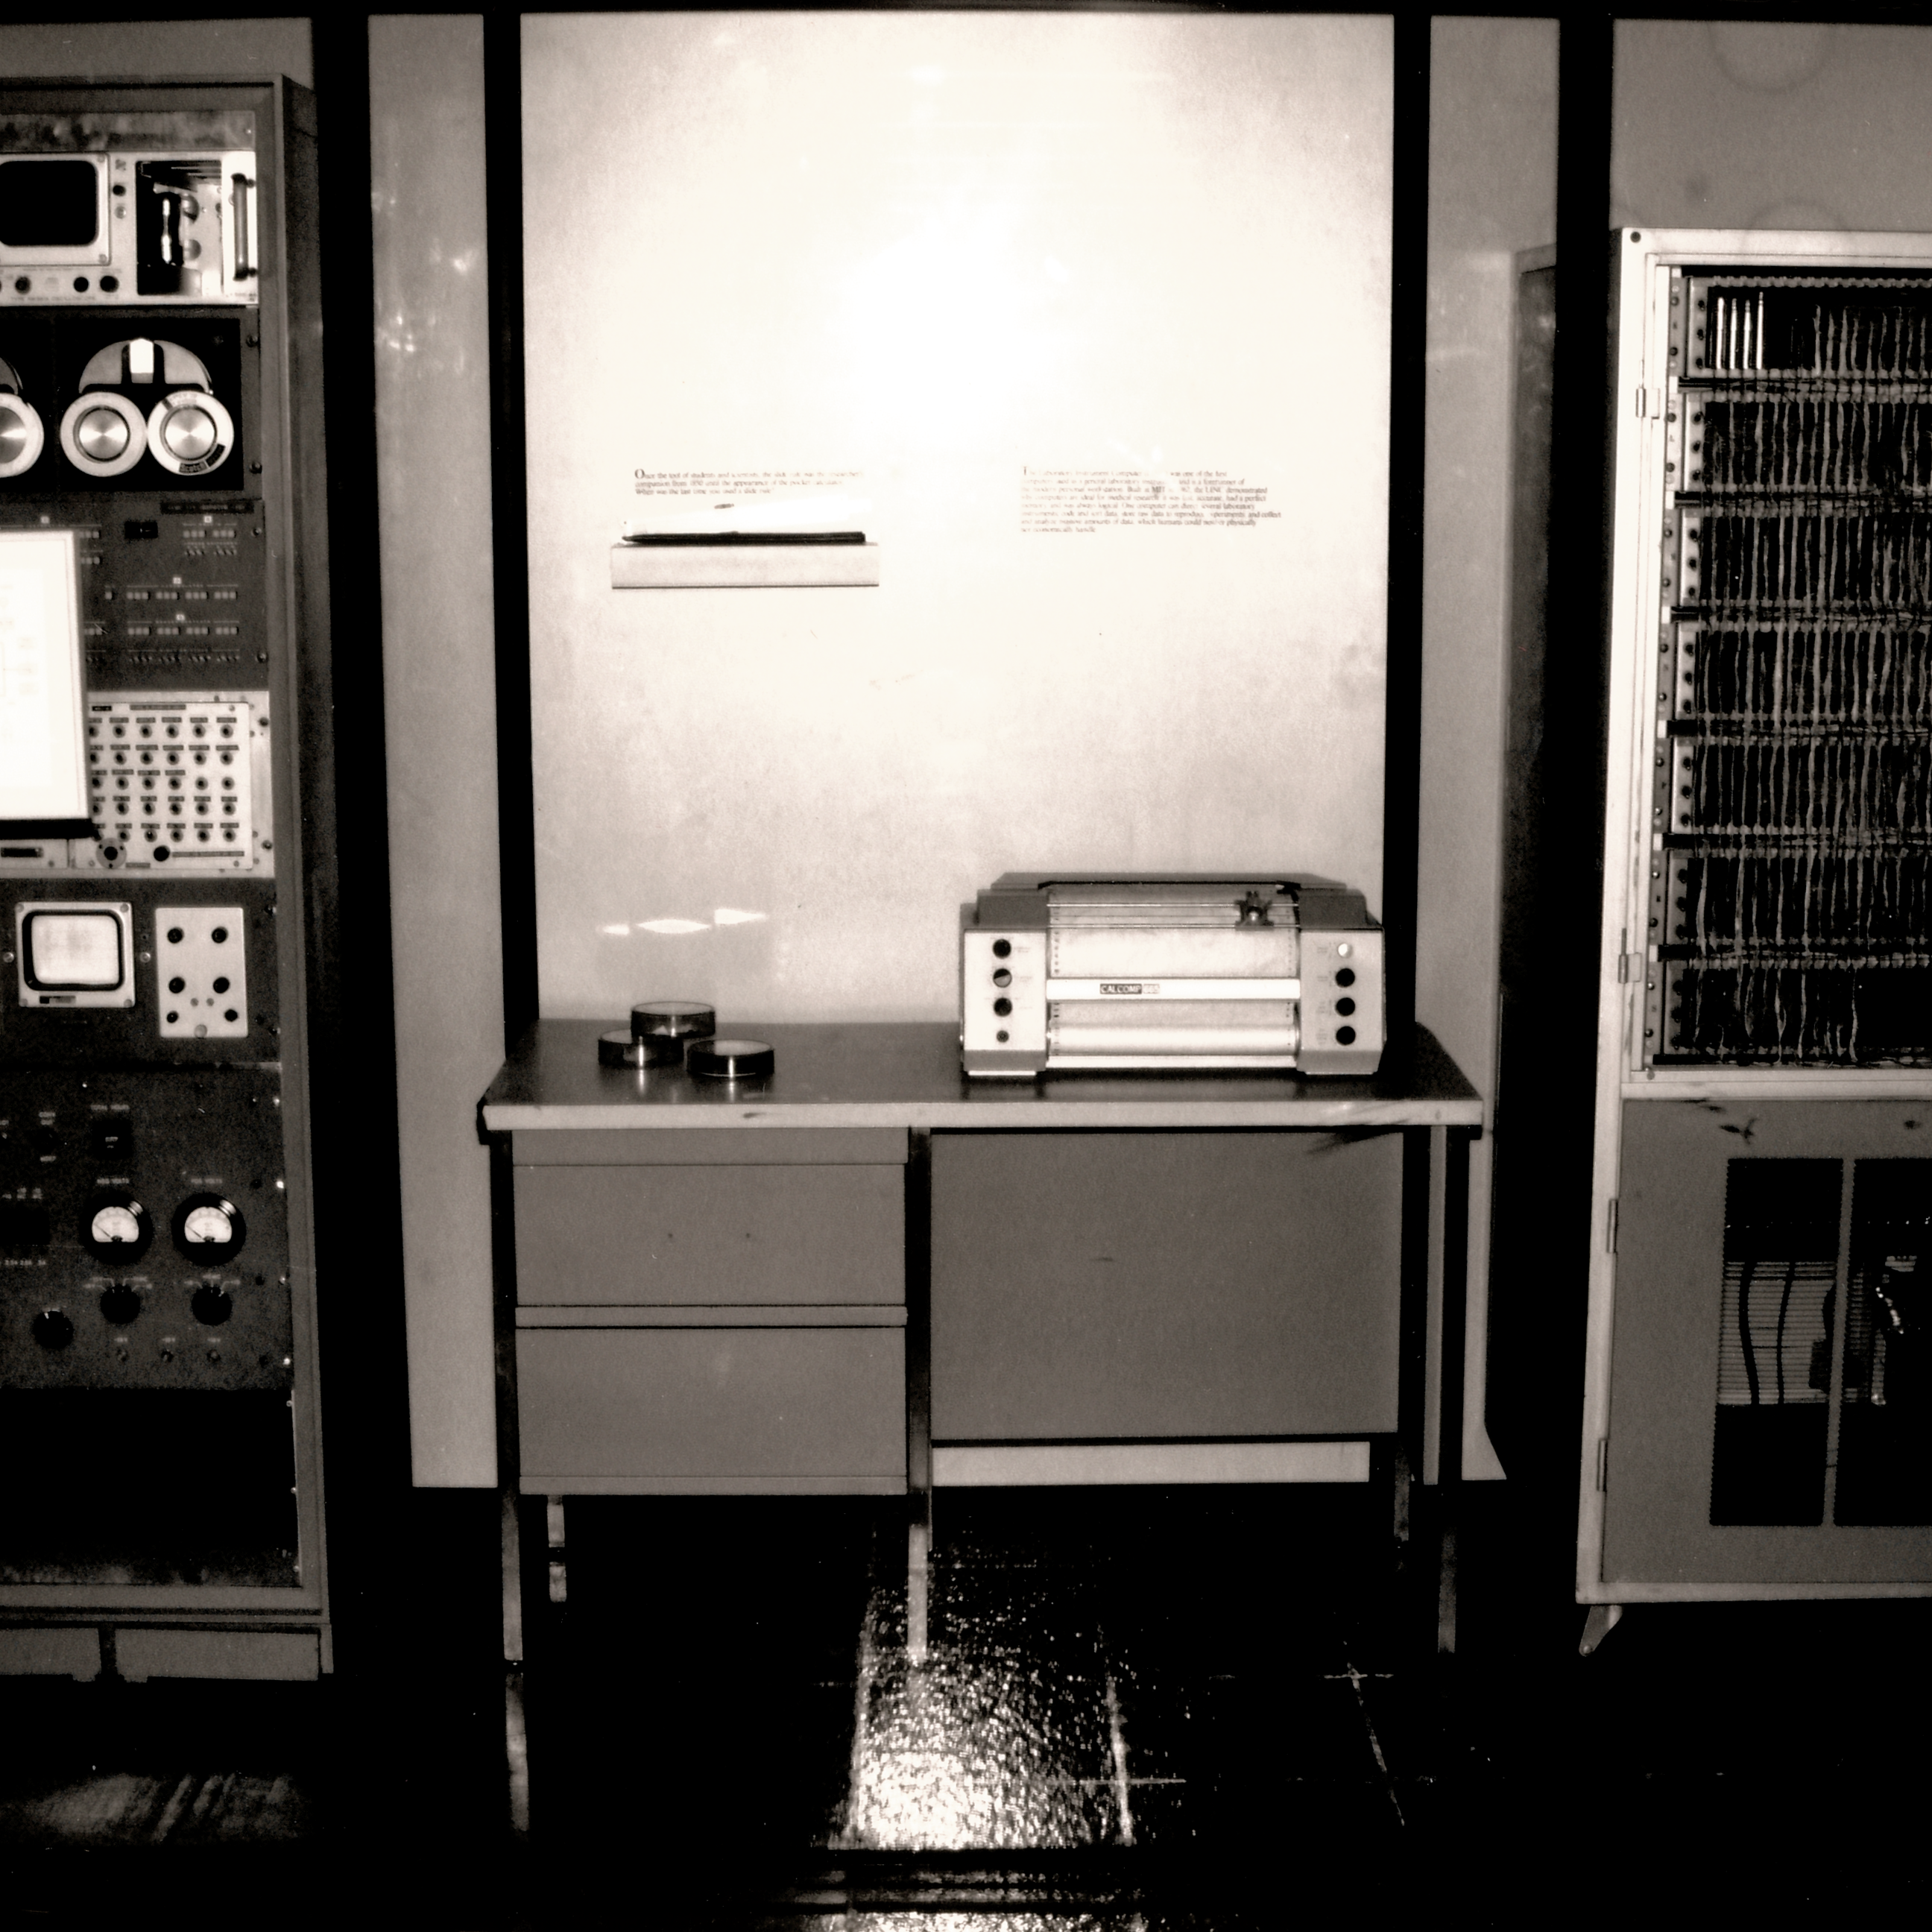 Photo of the LINC, which is an early laboratory computer